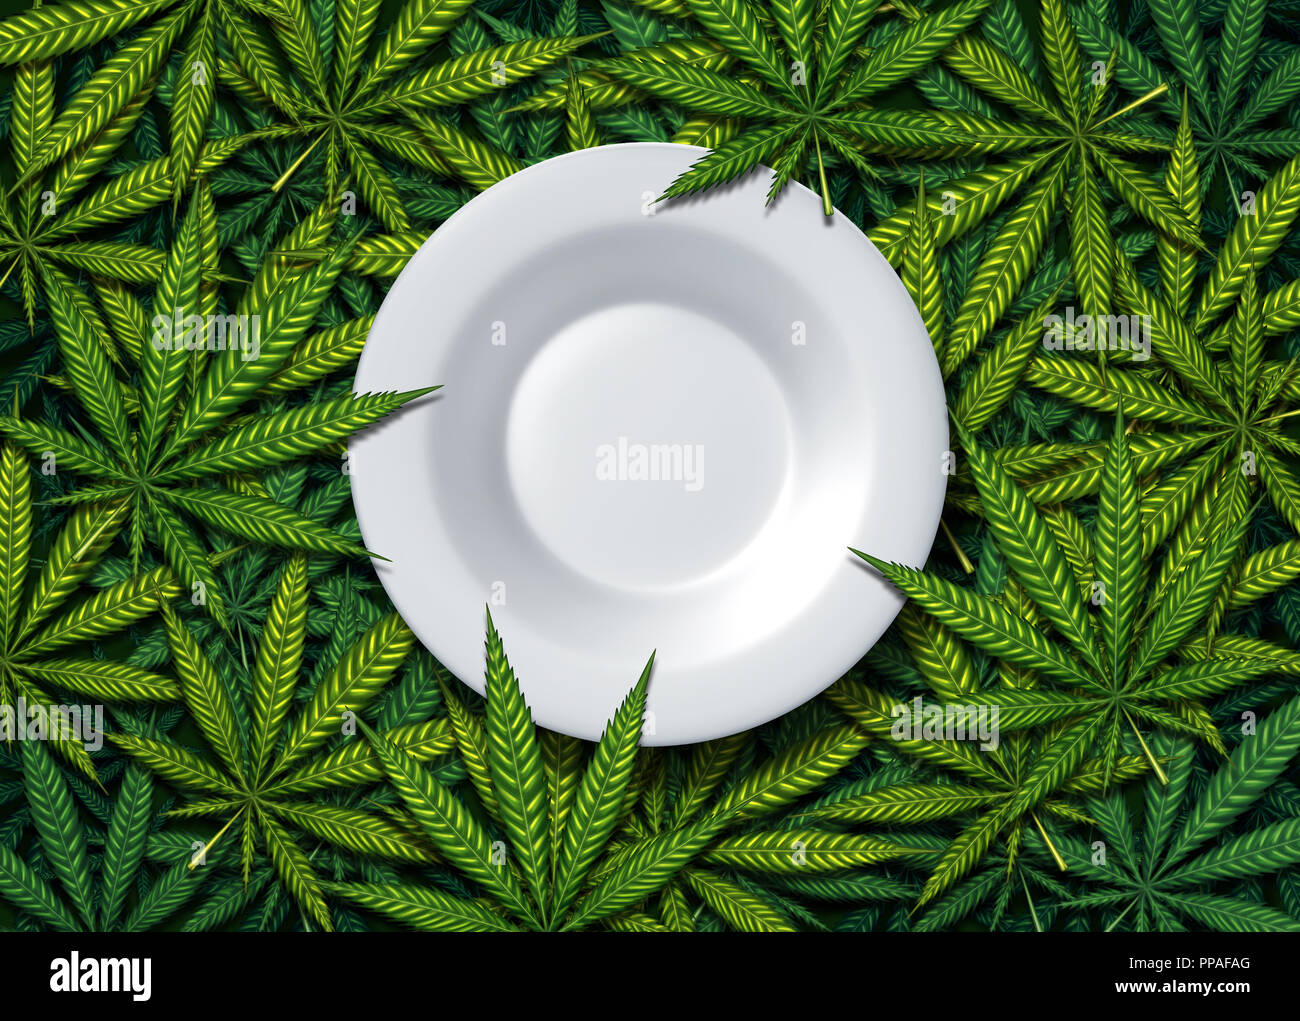 Cannabis food and weed edibles or marijuana edible snack with a dinner plate on leaves representing hemp herbal meal infused with psychoactive. Stock Photo